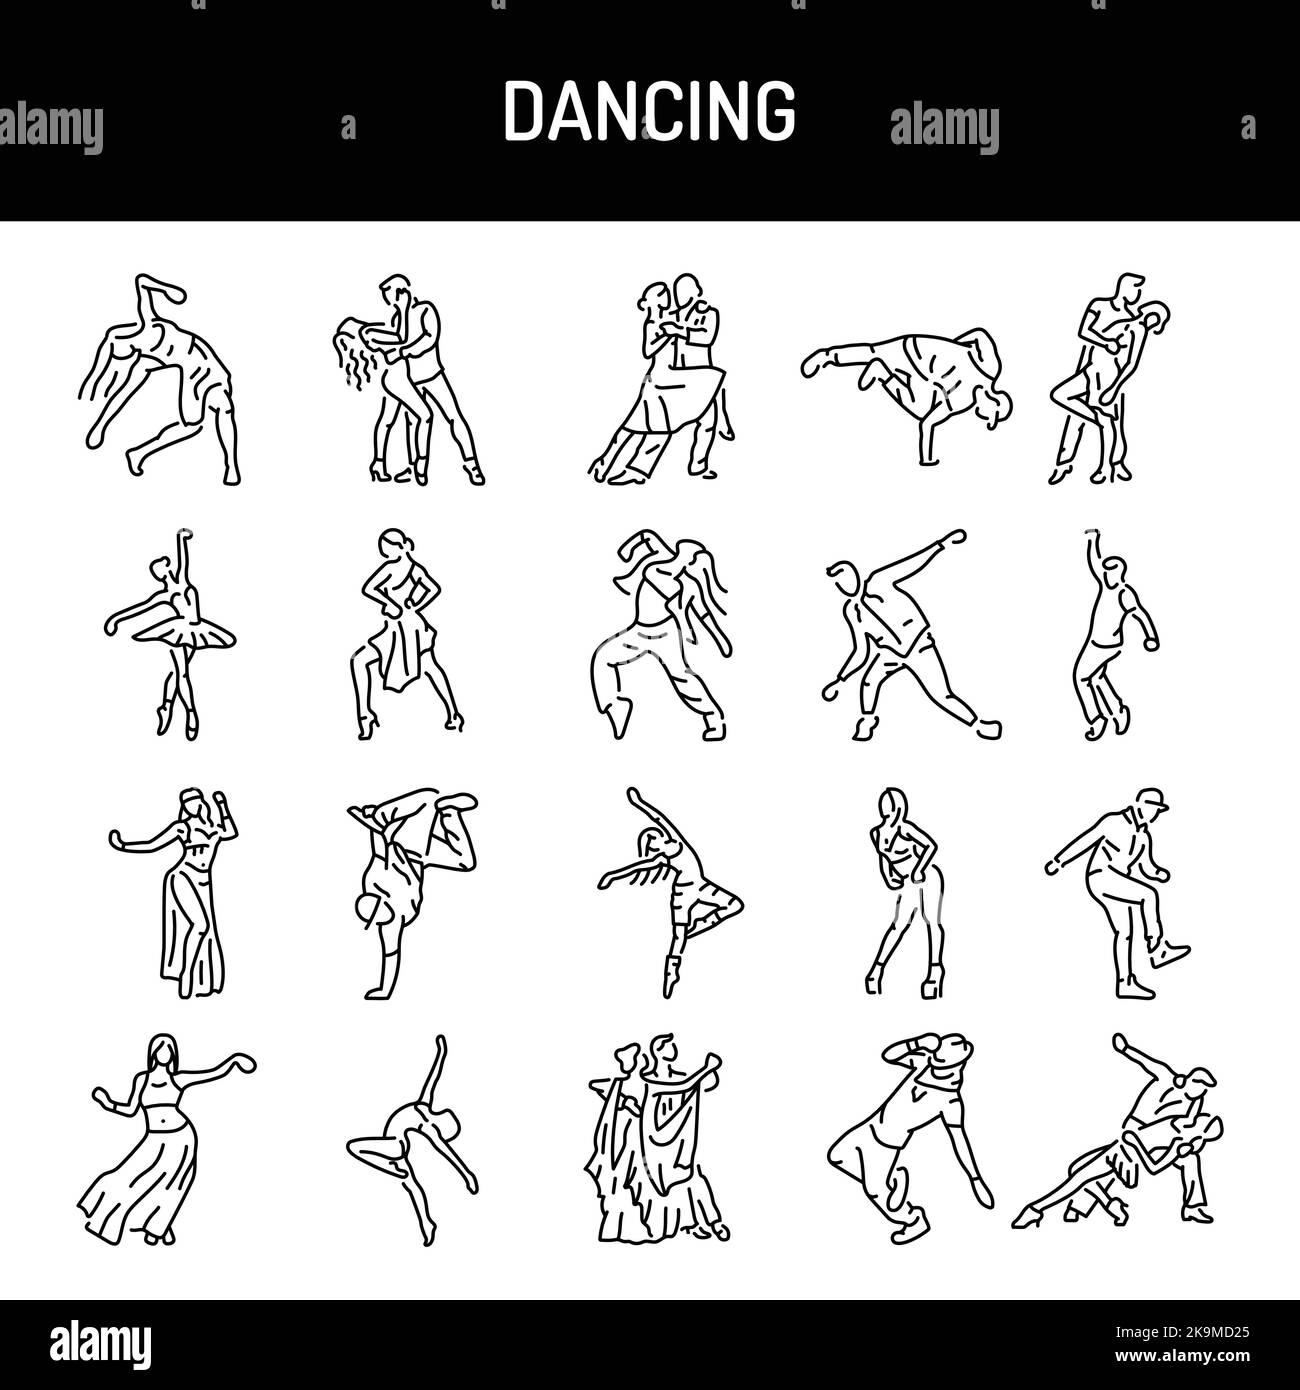 Dancing color line icons set. Pictograms for web page Stock Vector